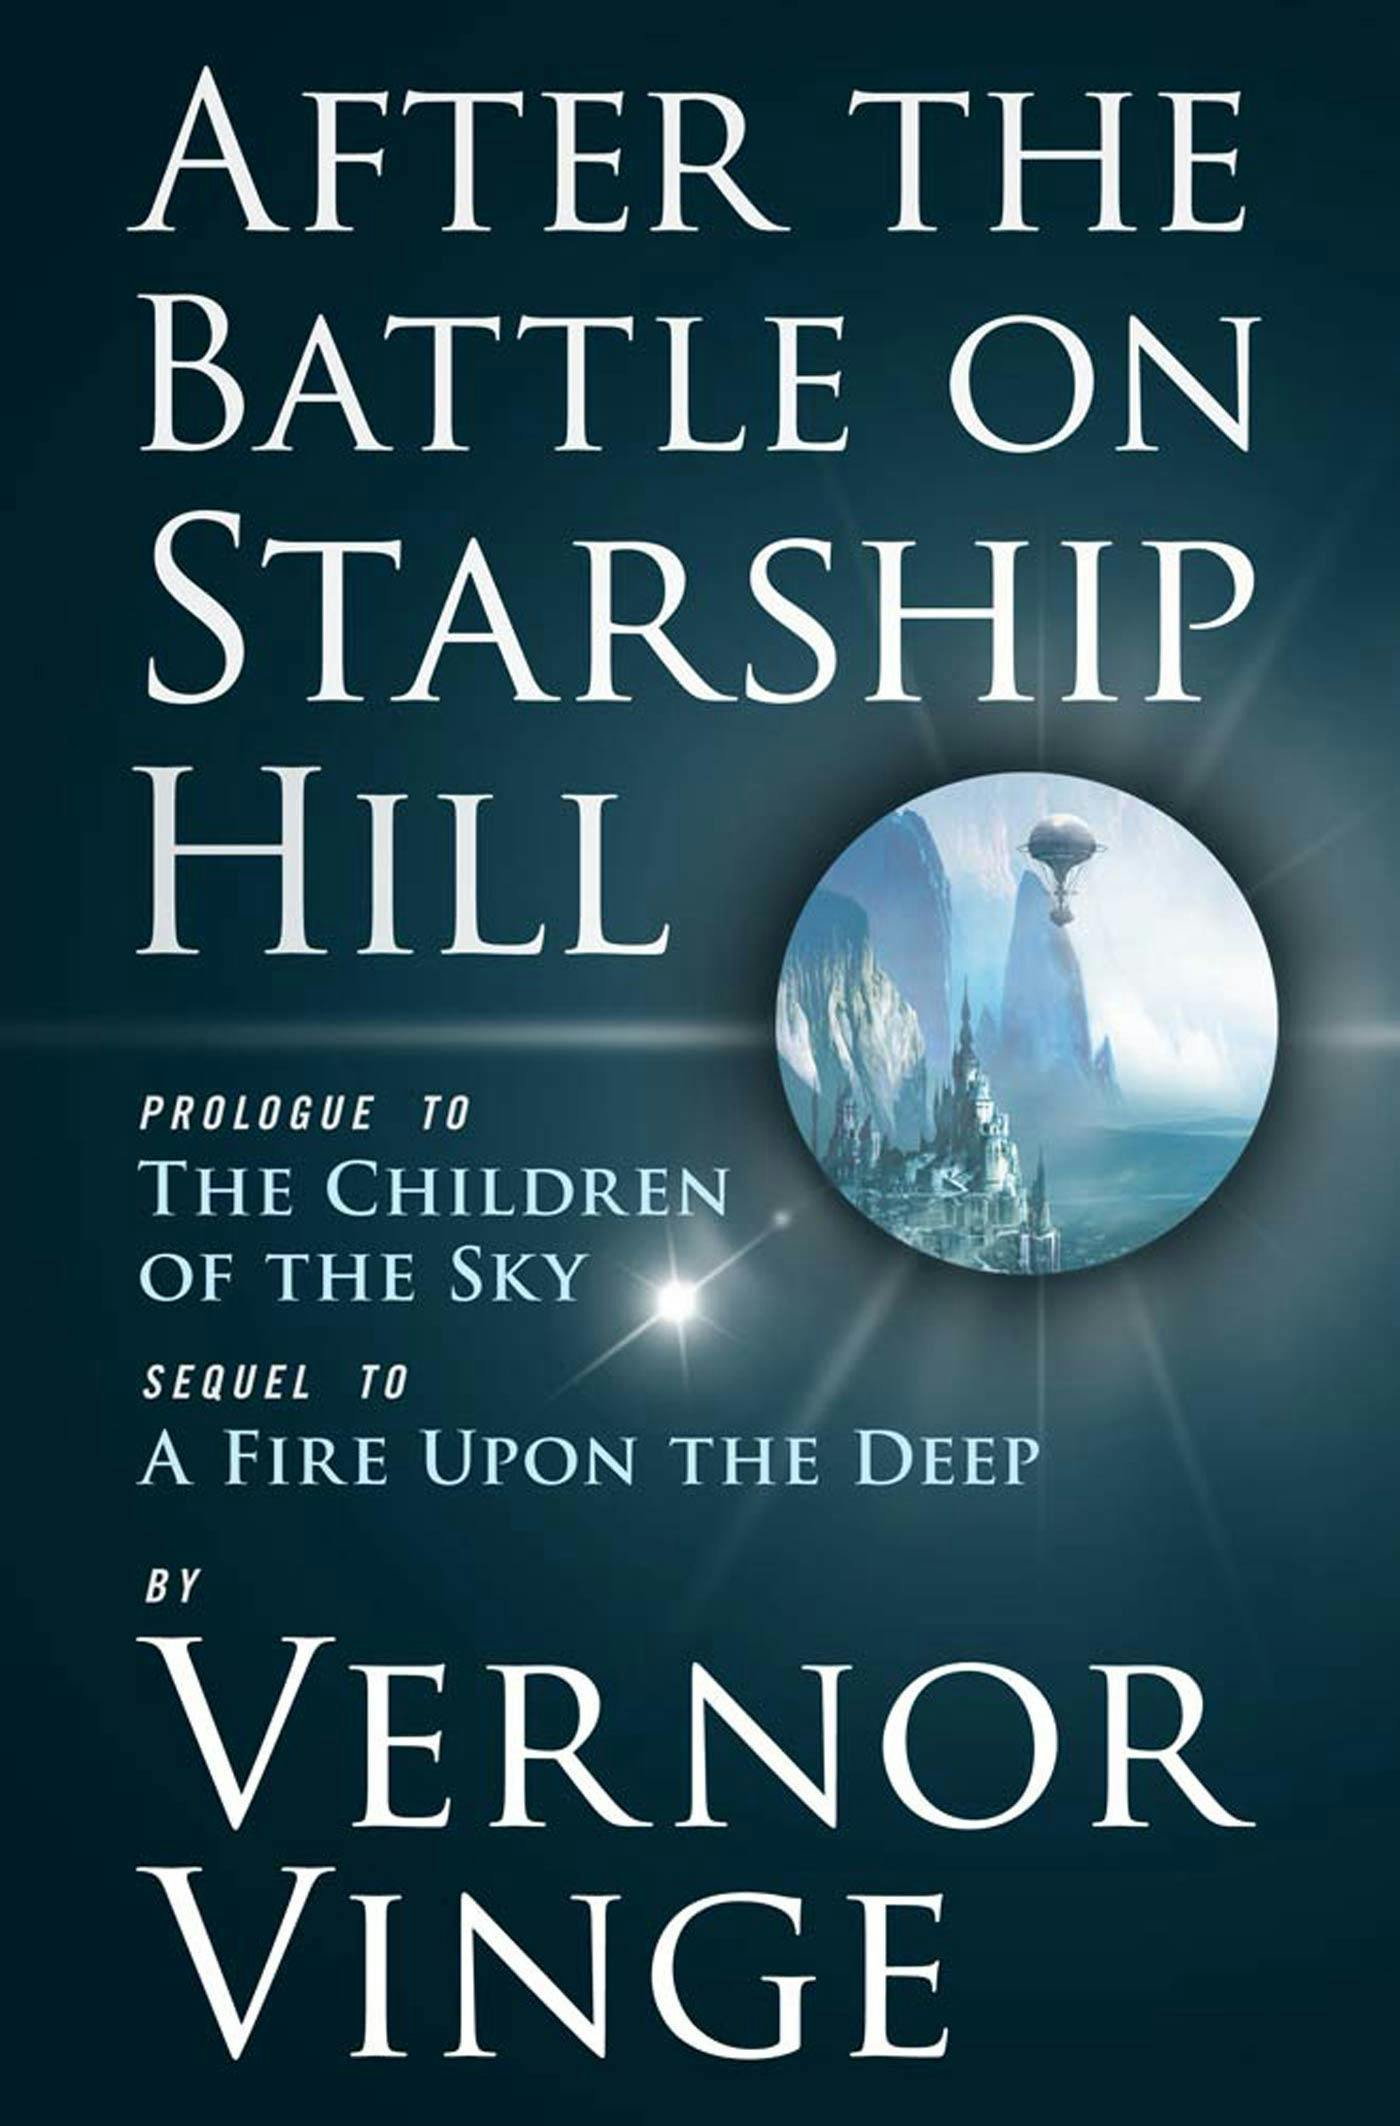 A Fire Upon the Deep by Vernor Vinge Book Review